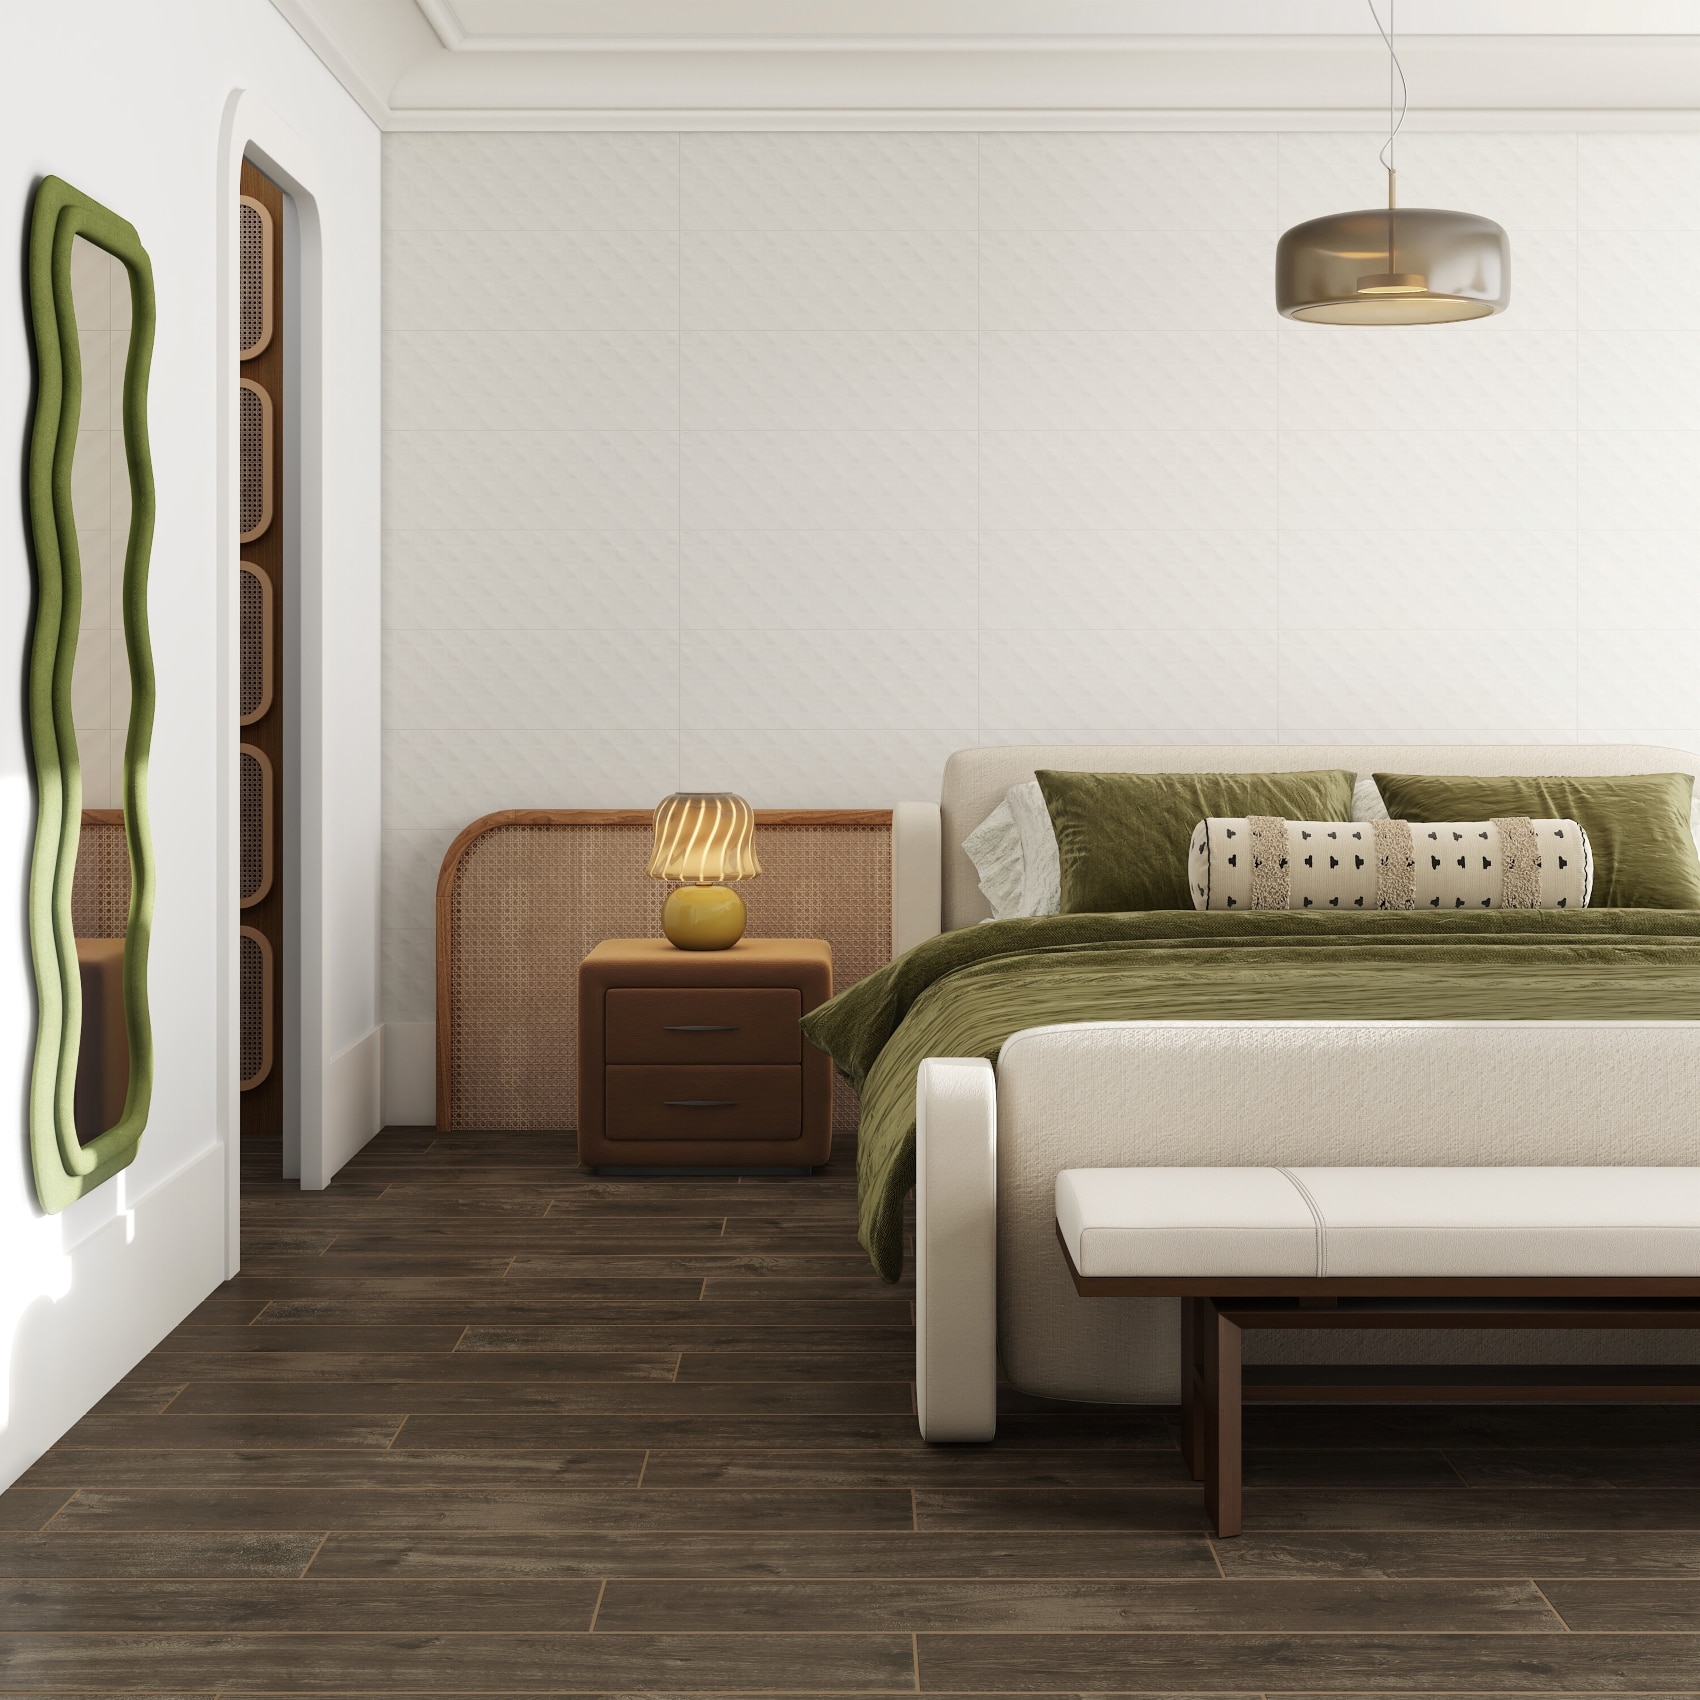 Modern bedroom with white boucle bedframe, green bedding and a wood look floor.